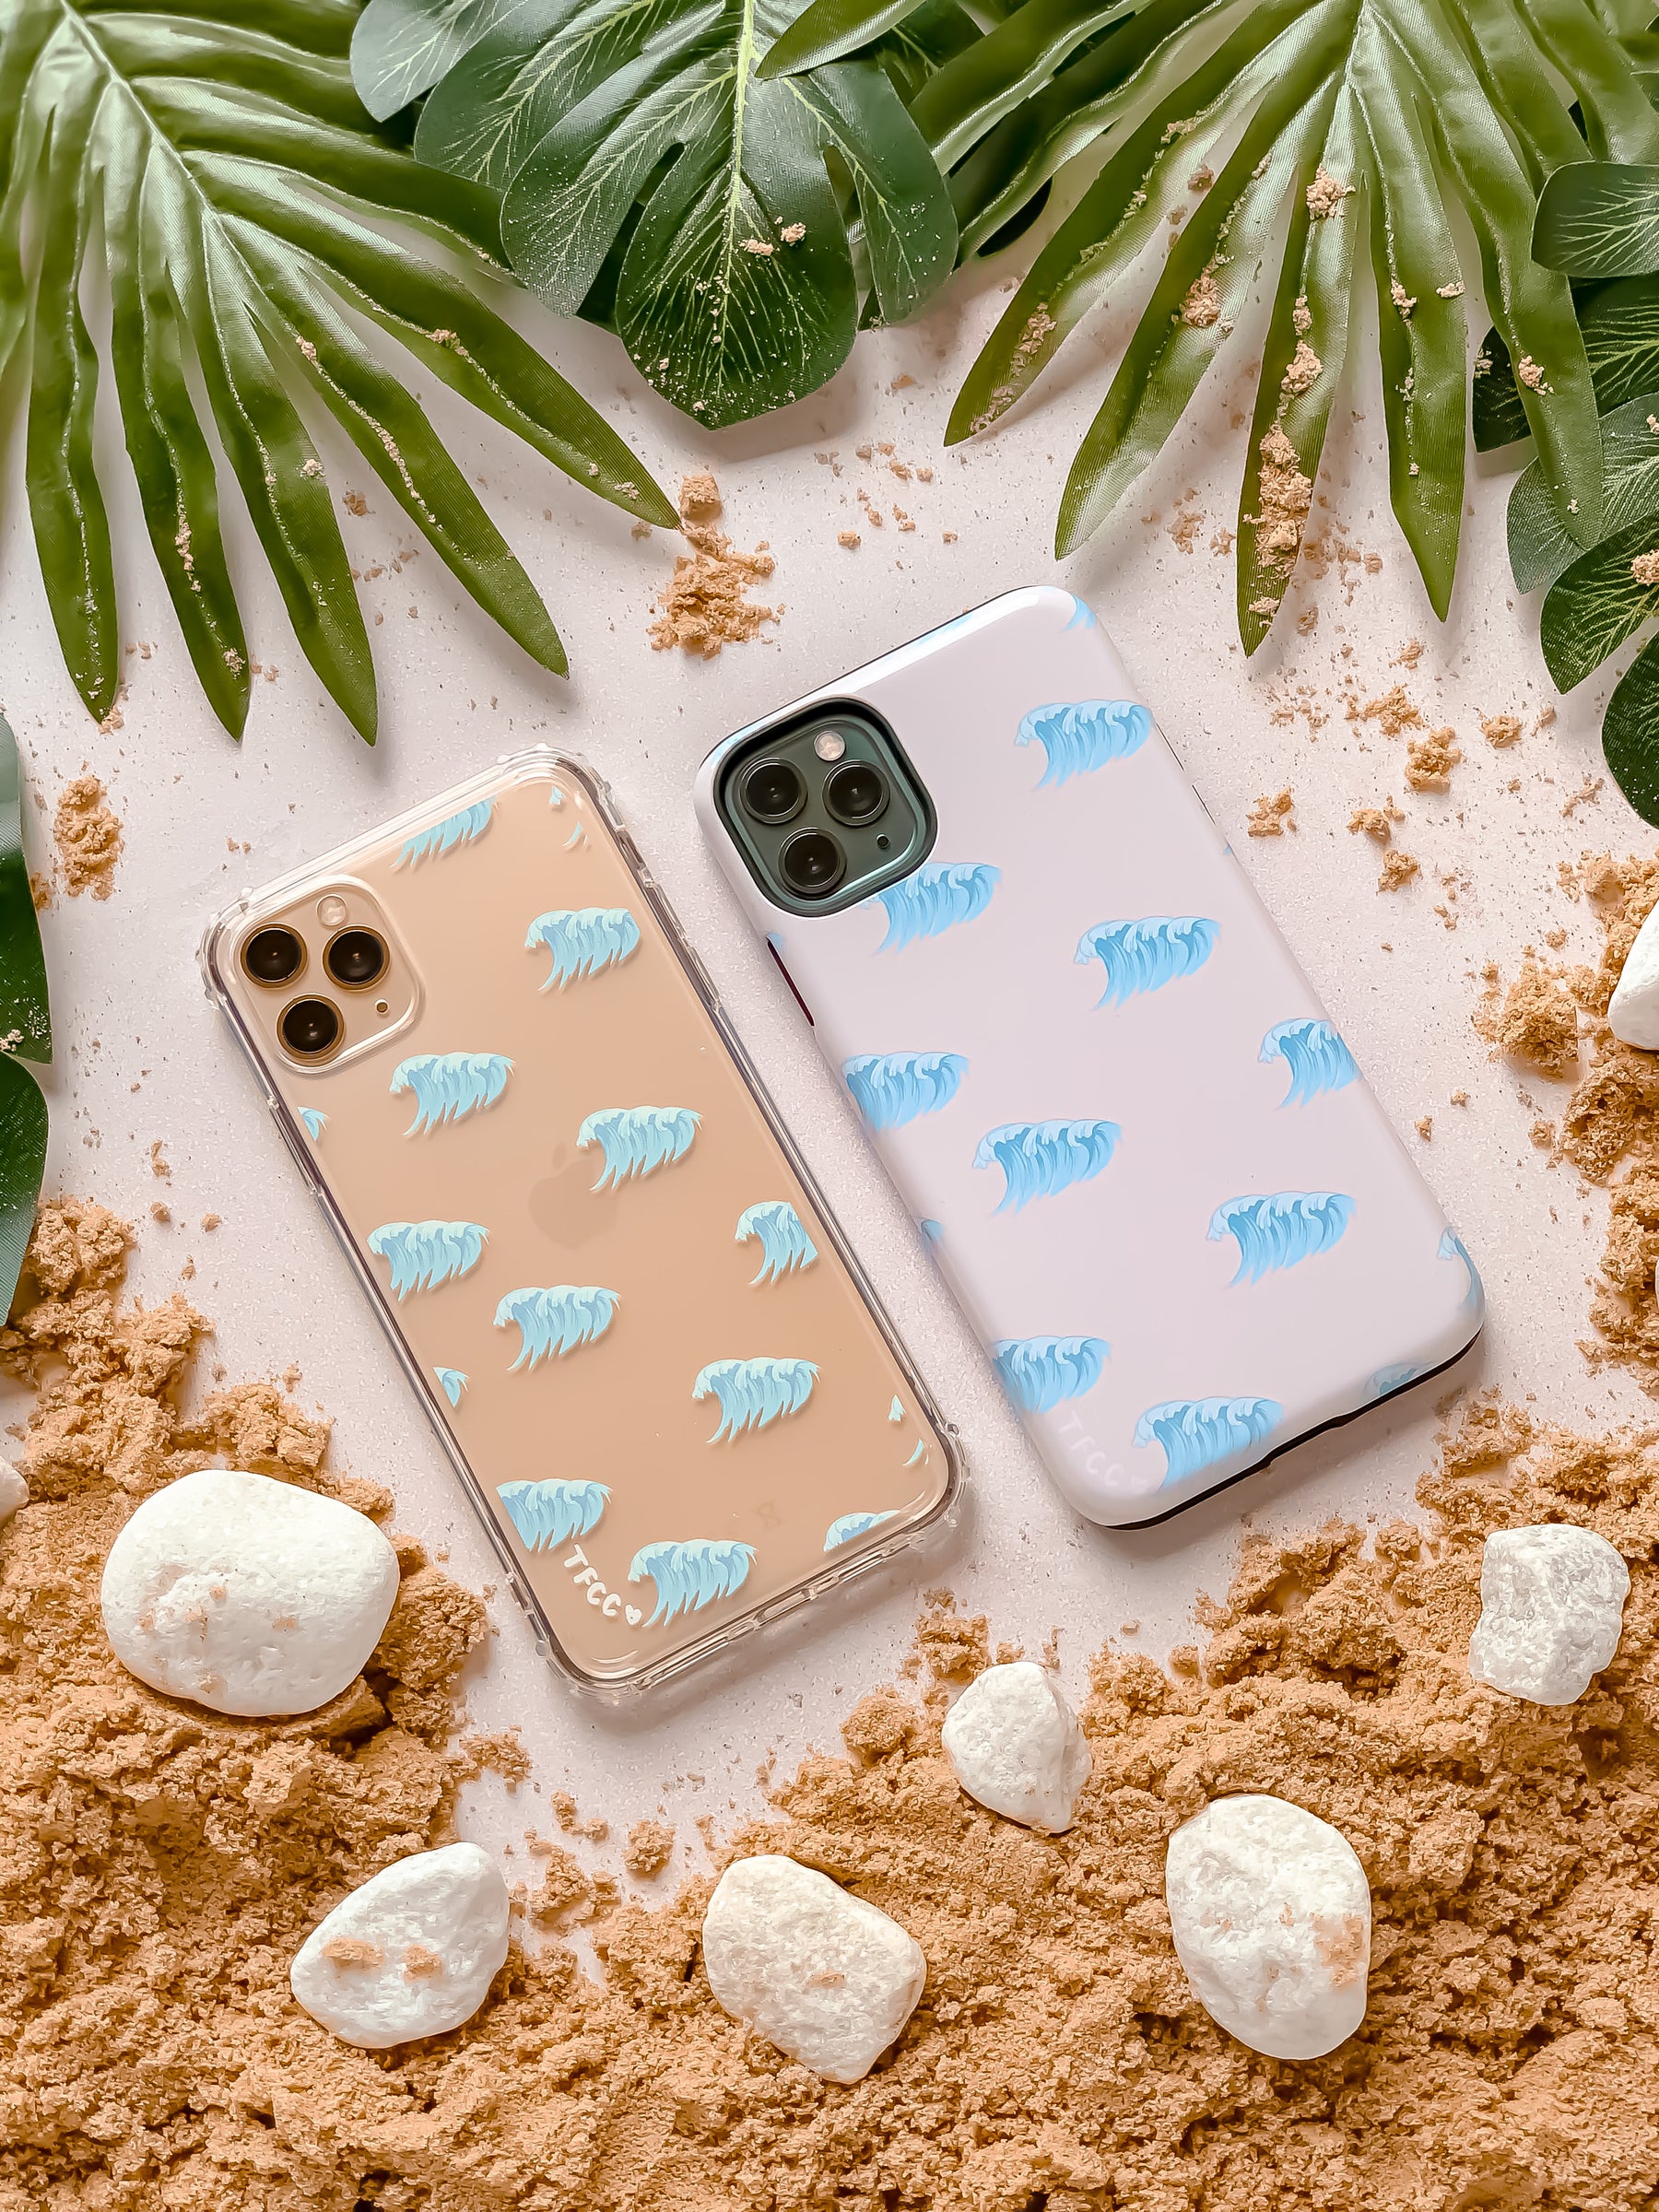 OCEAN WAVES CLEAR CASE - thefonecasecompany